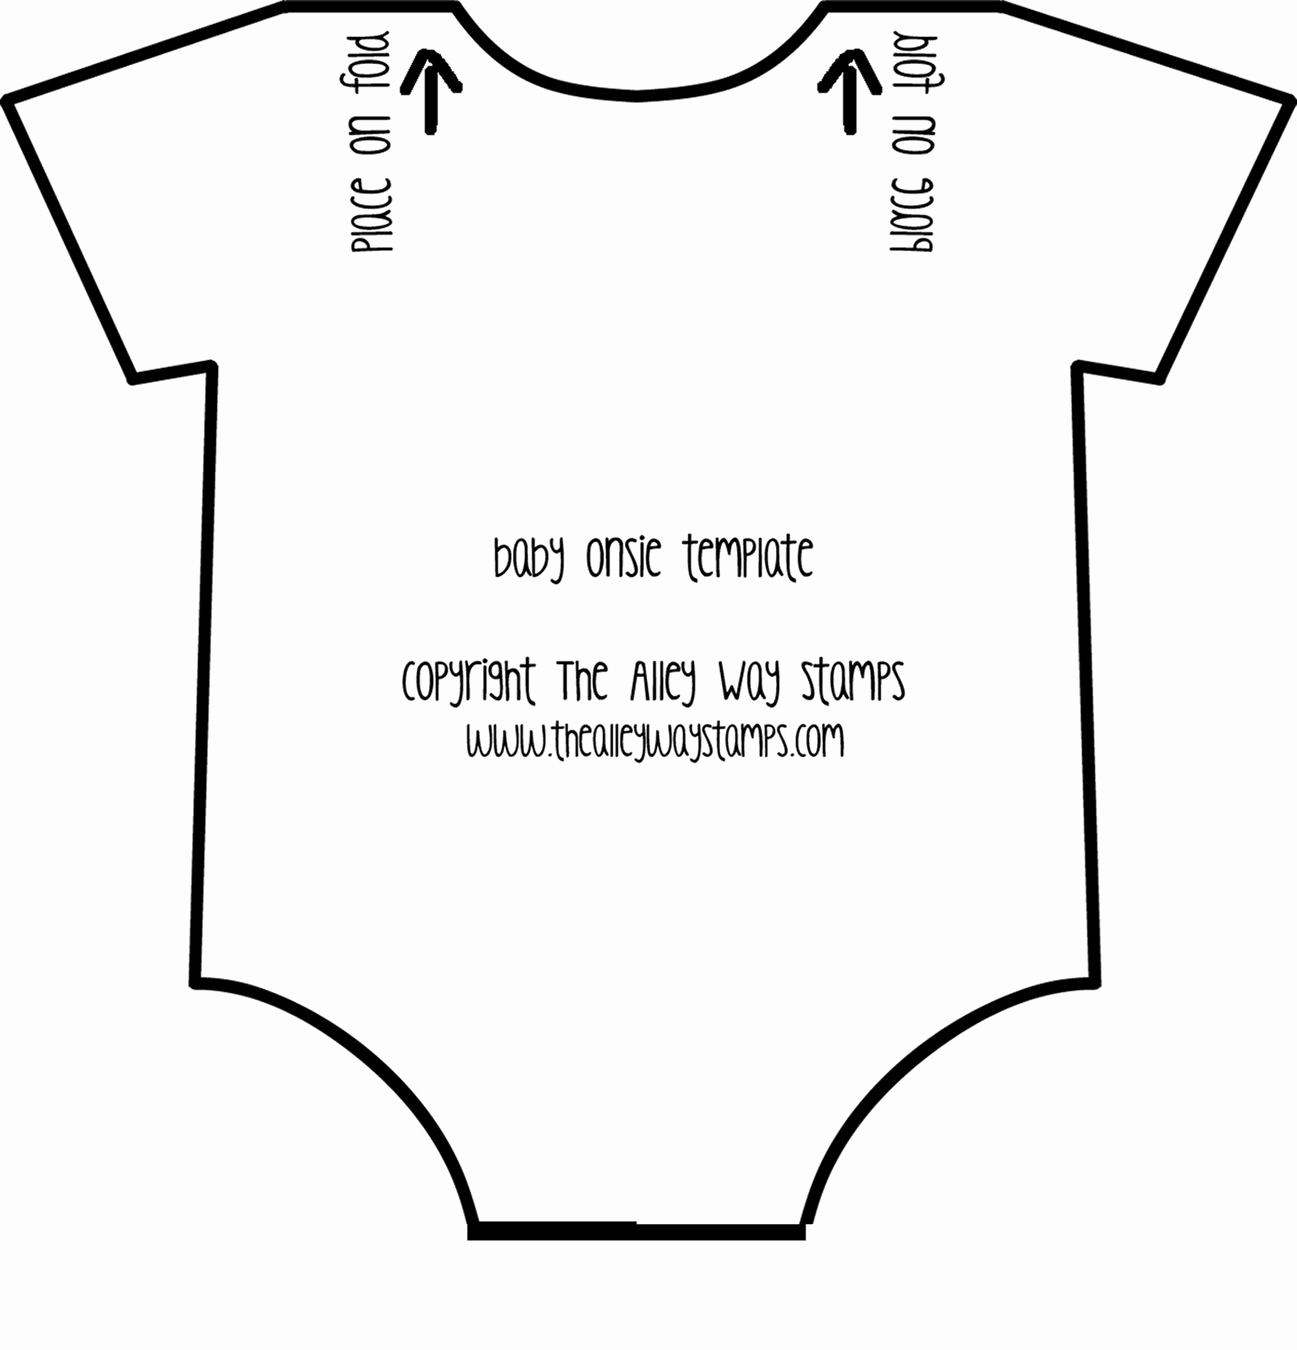 Free Onesie Invitation Template Awesome Sie Template Free From the Alley Way Stamps Freebies